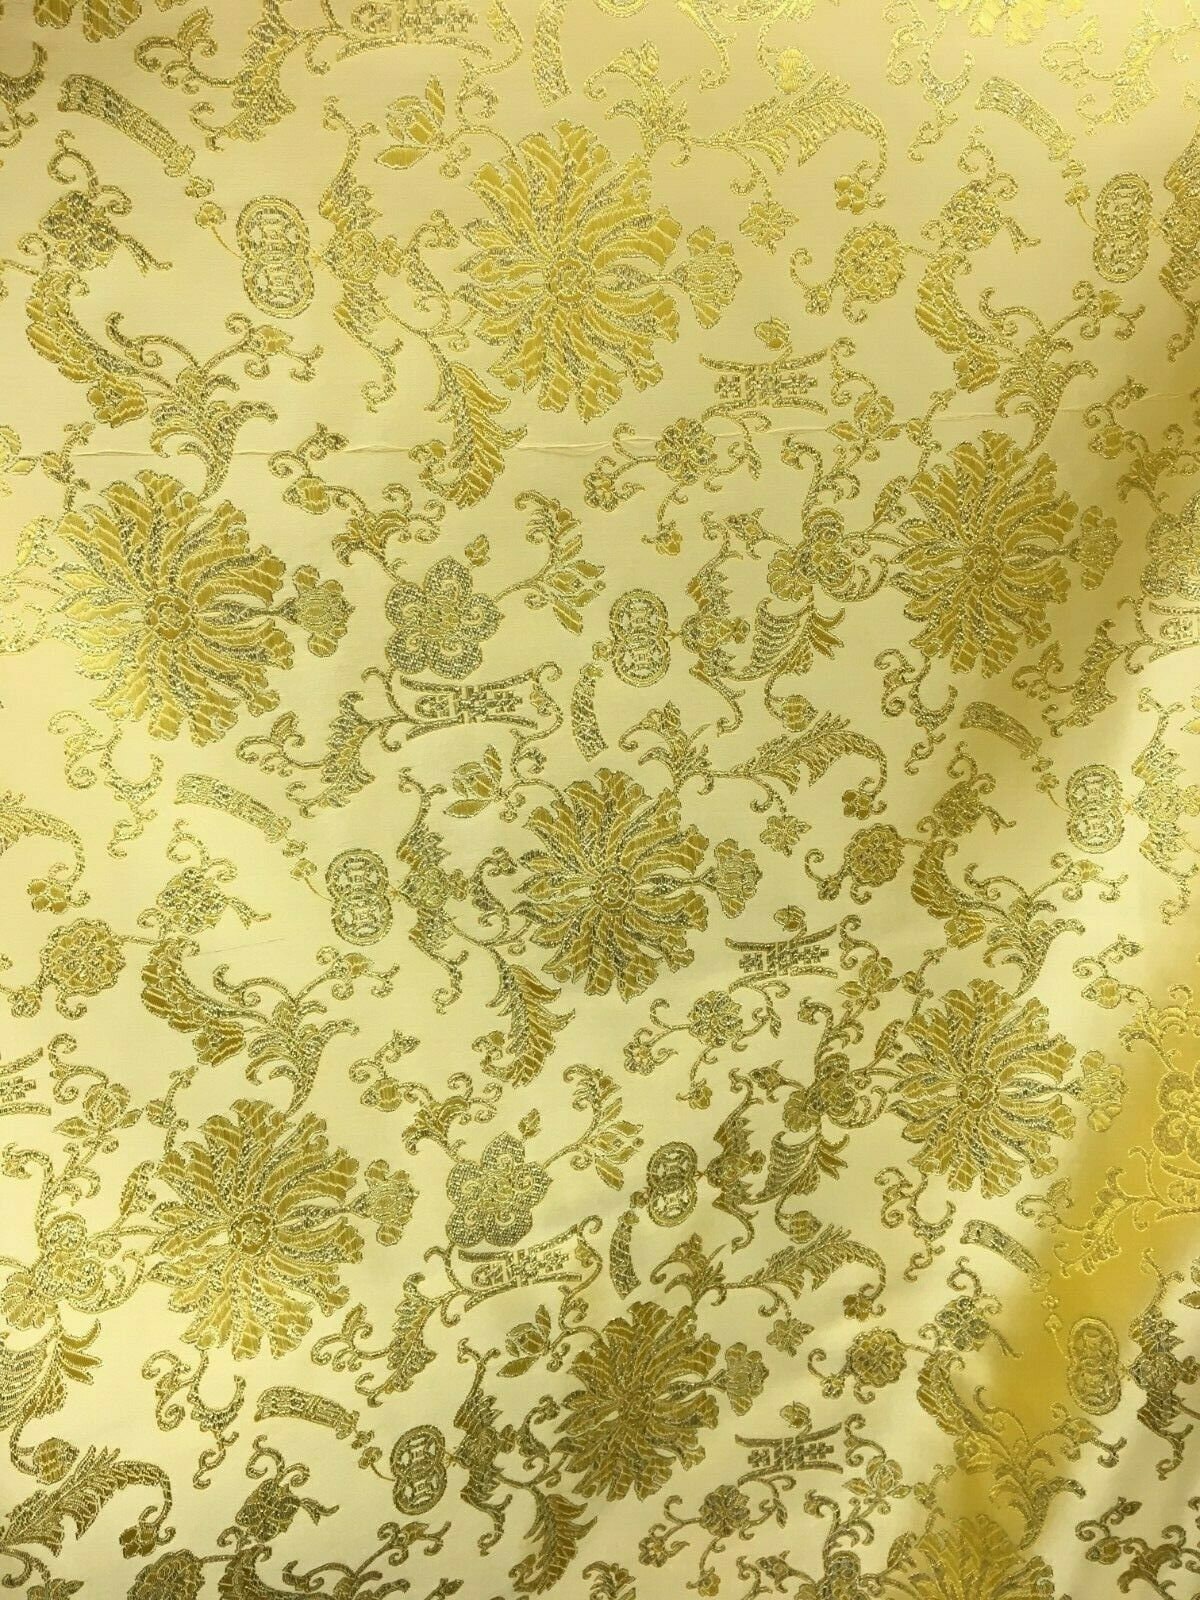 GOLD Metallic Floral Brocade Fabric (56 in.) Sold By The Yard